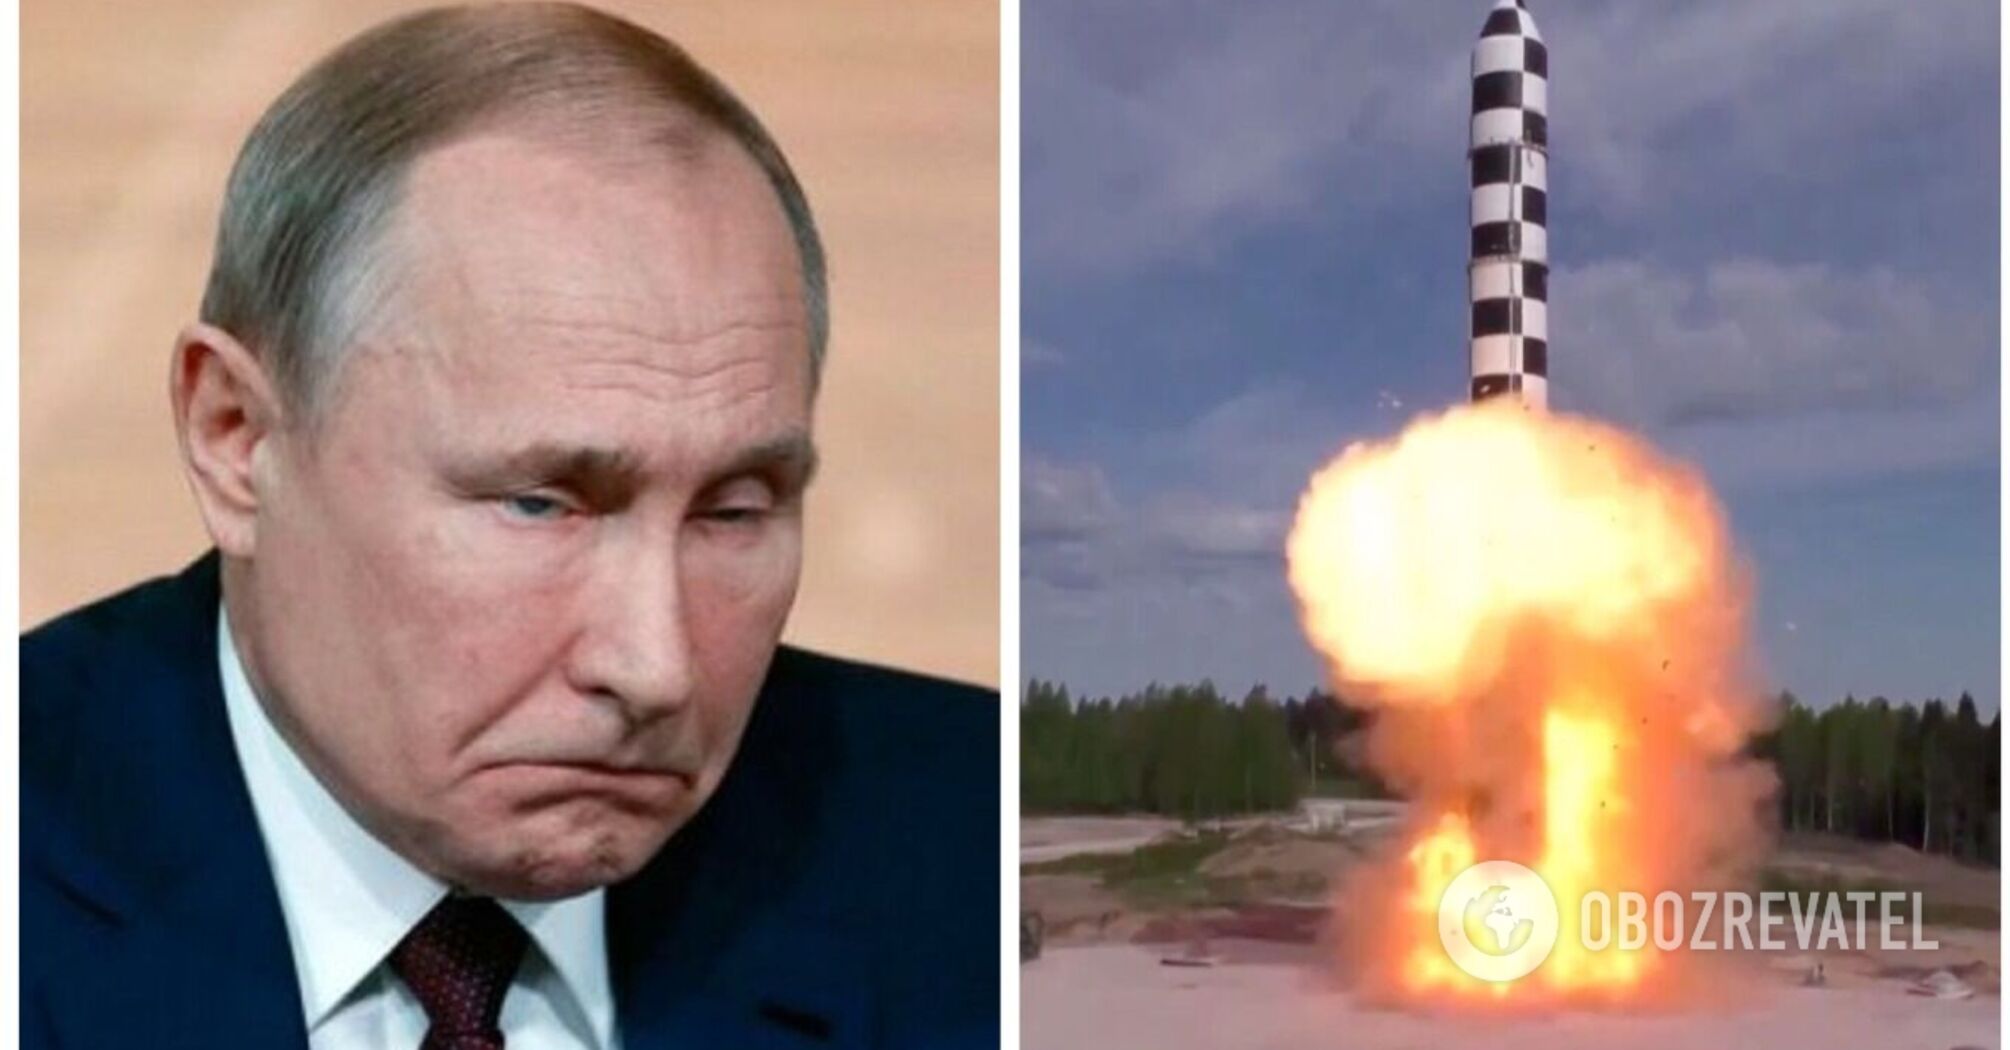 Russia announces exercises to improve the readiness of its nuclear forces and accuses the West of 'provocation' over Ukraine